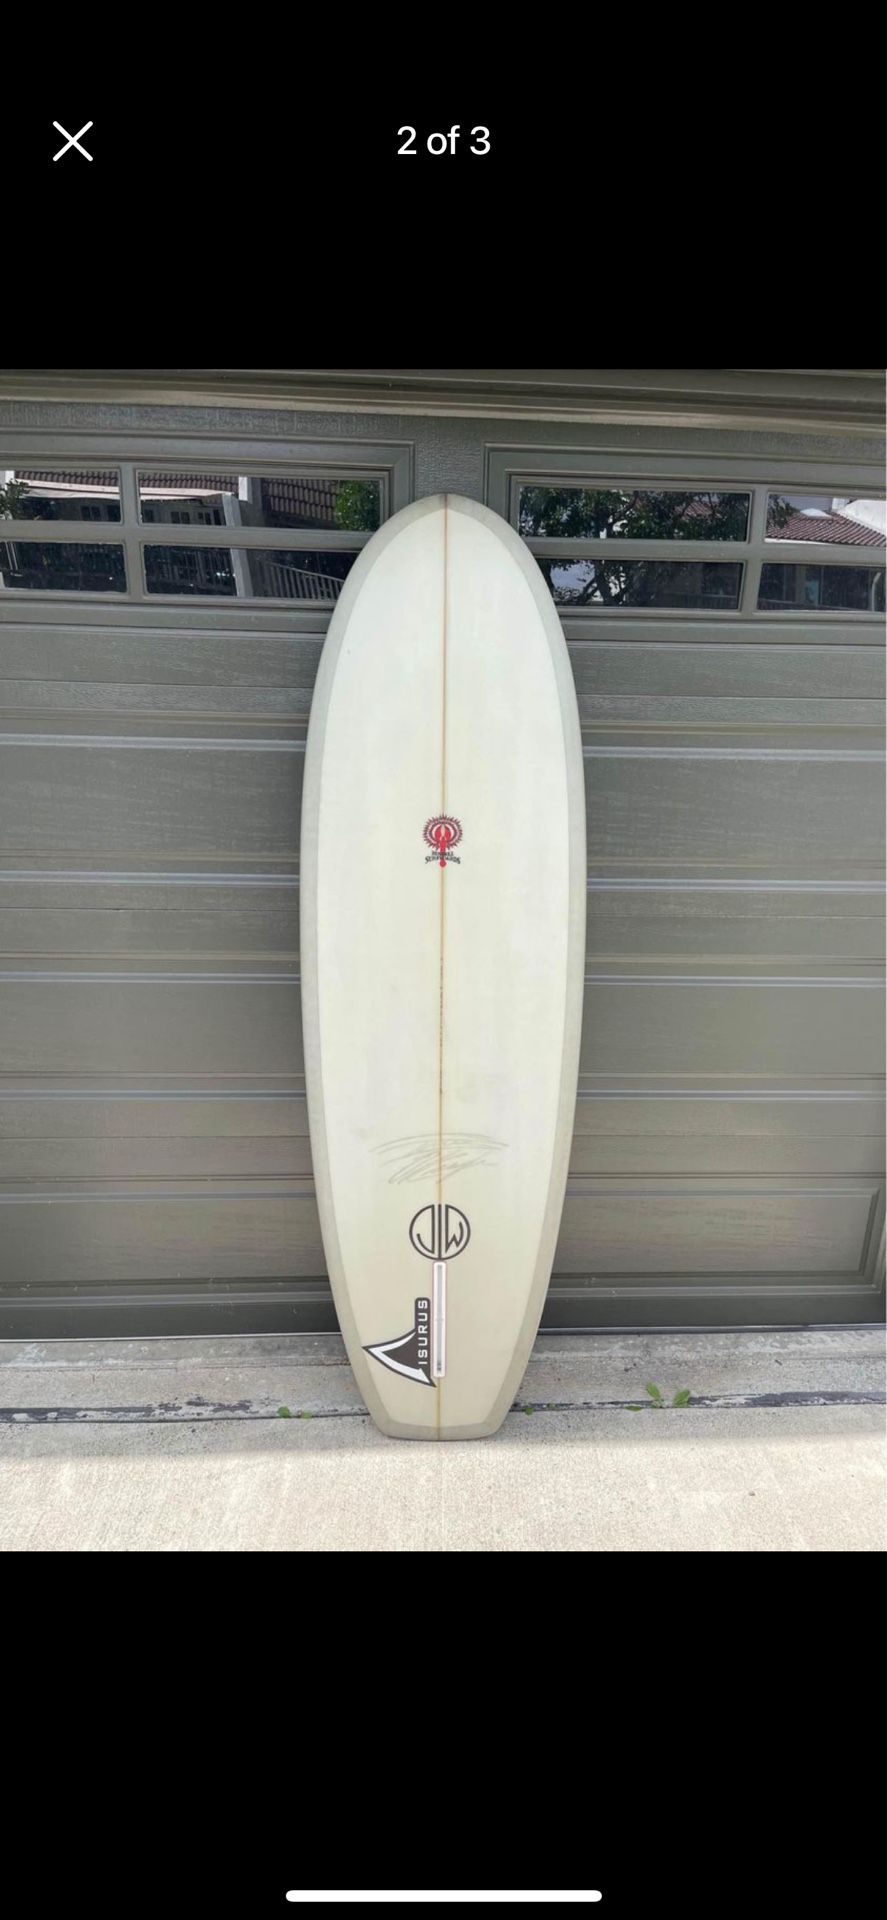 Russell Displacement Hull Surfboard 